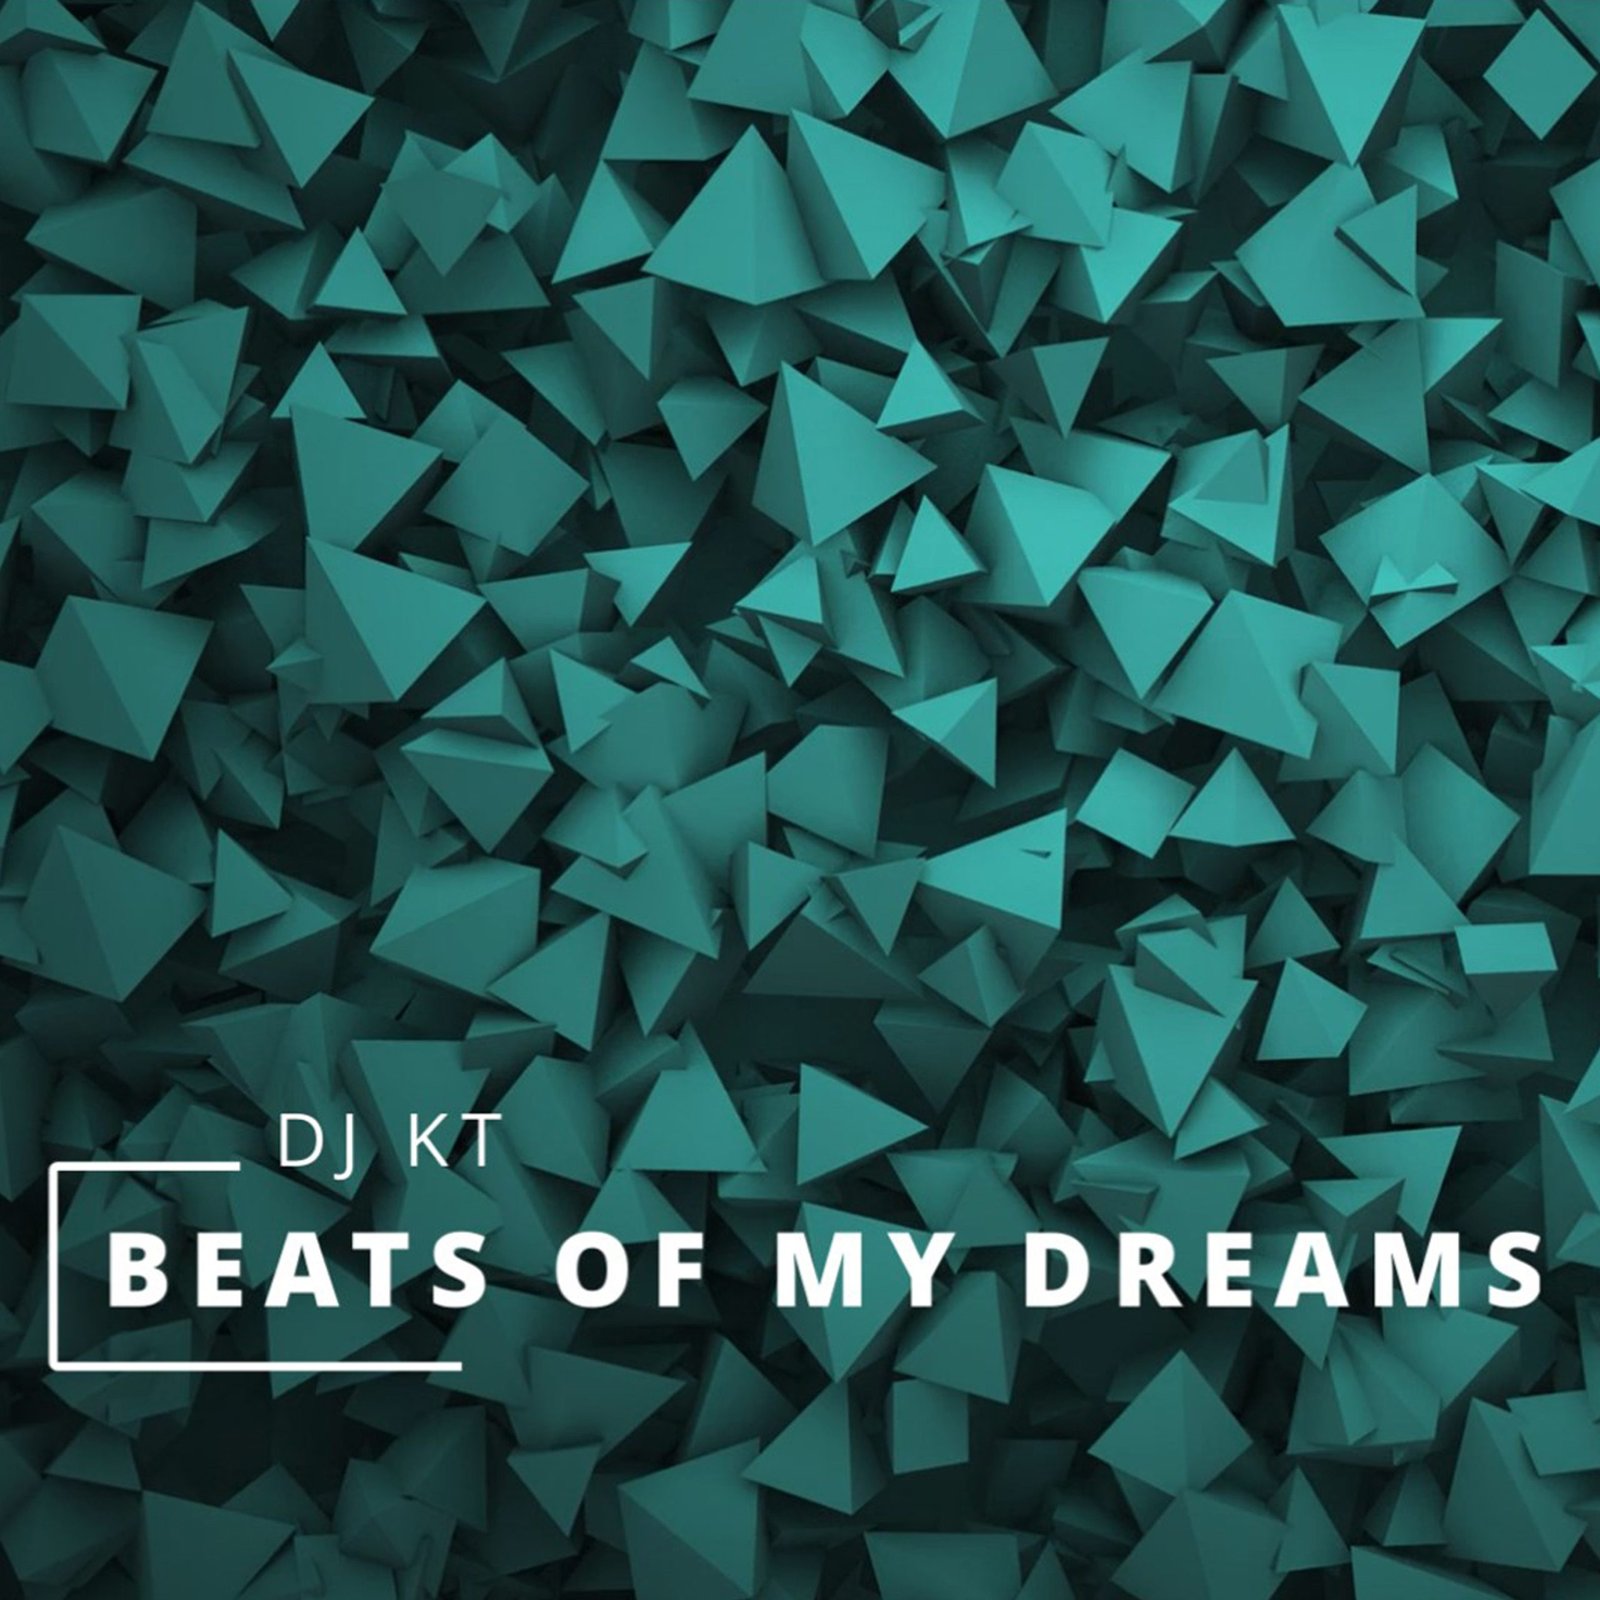 Presave Beats Of My Dreams on Spotify Now!